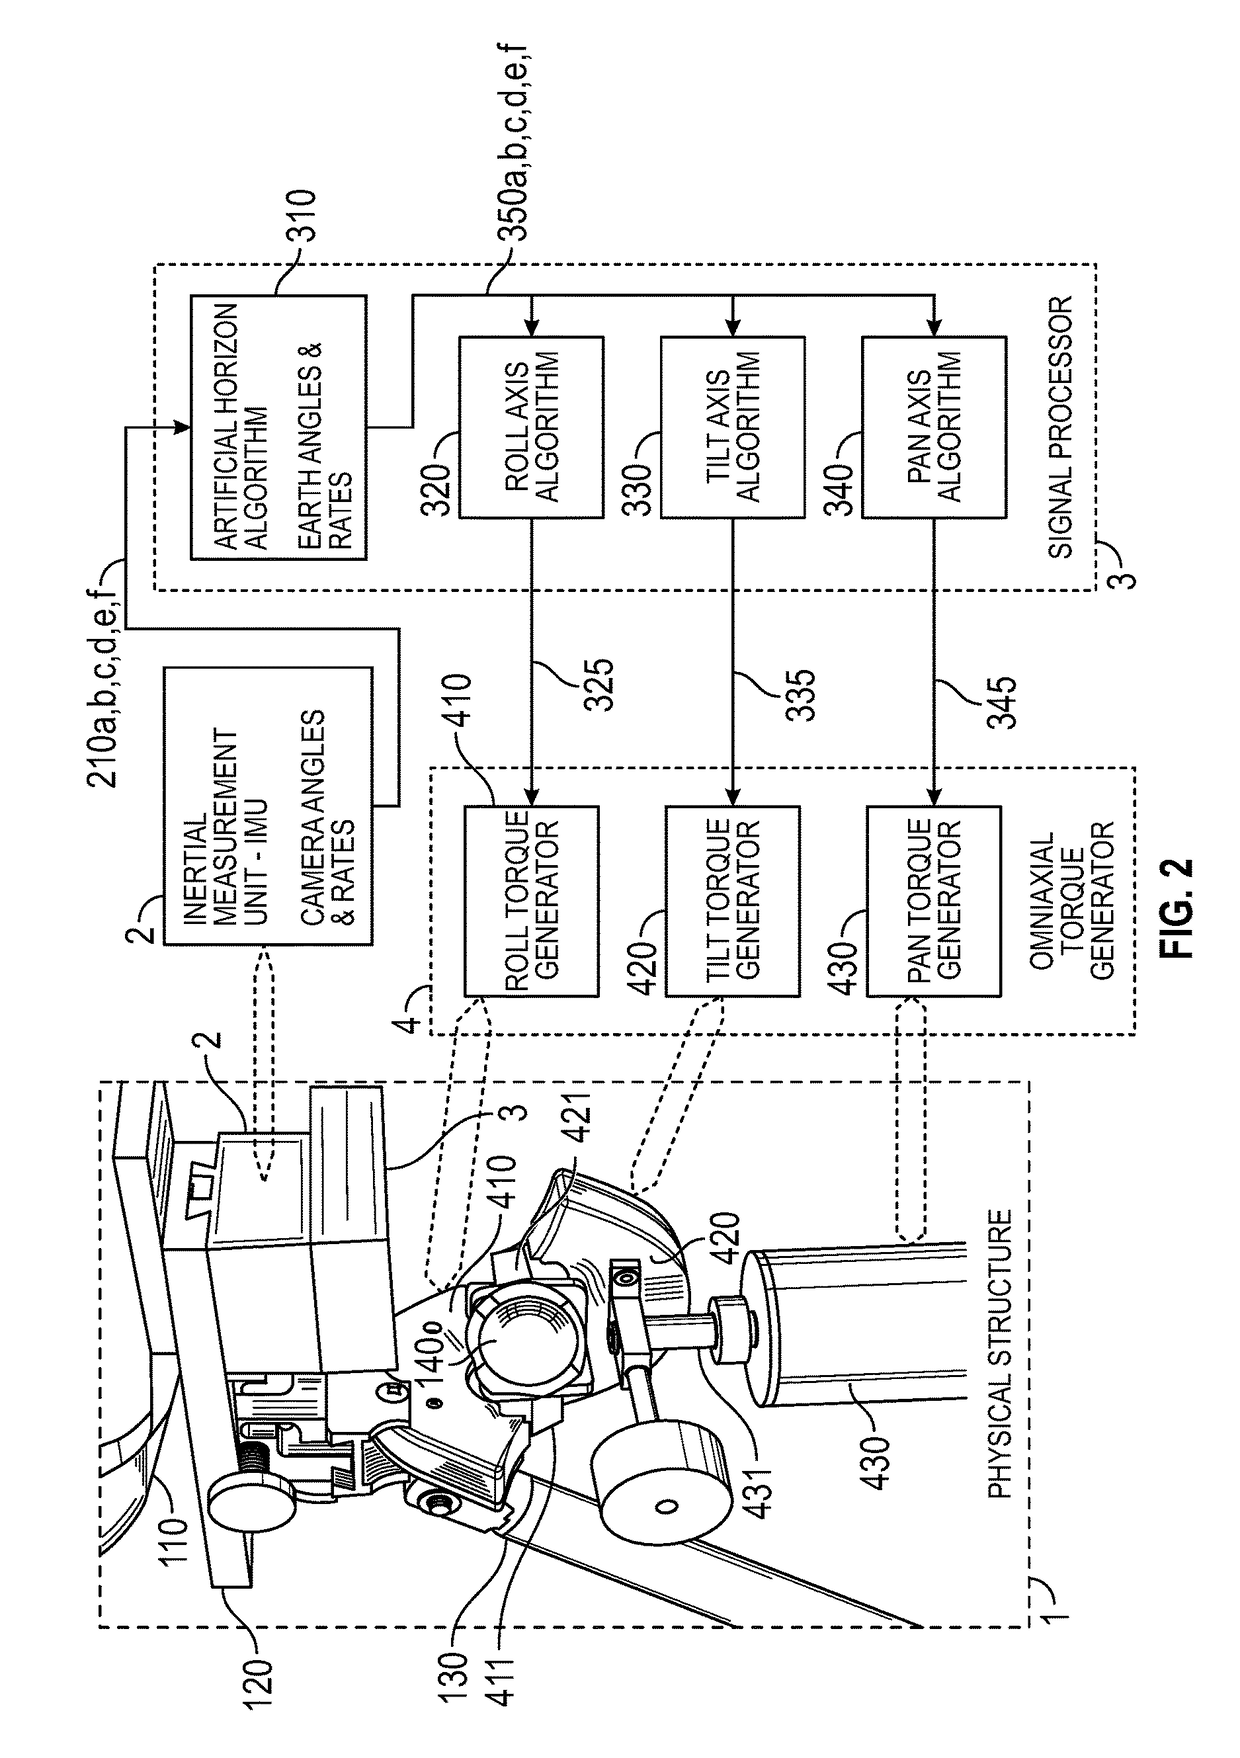 Actively stabilized payload support apparatus and methods